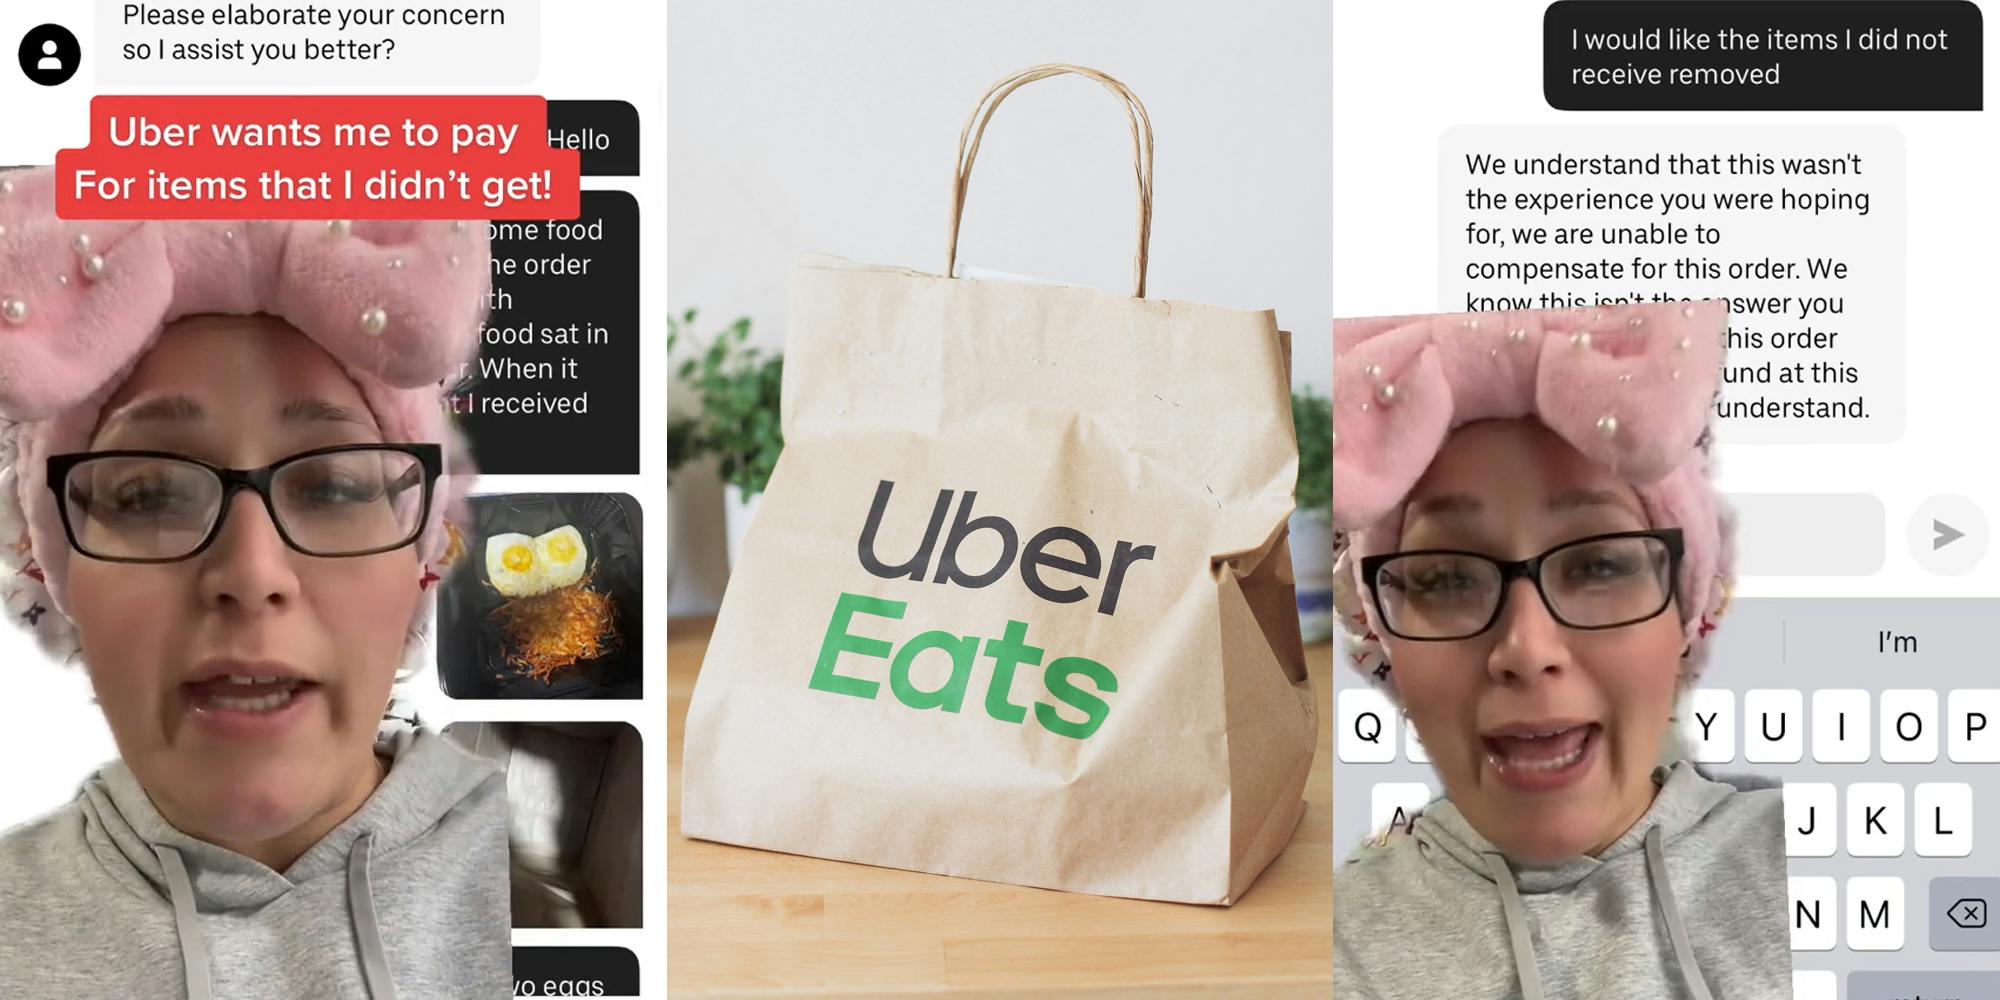 Customer Says Uber Eats Refuses to Refund Order